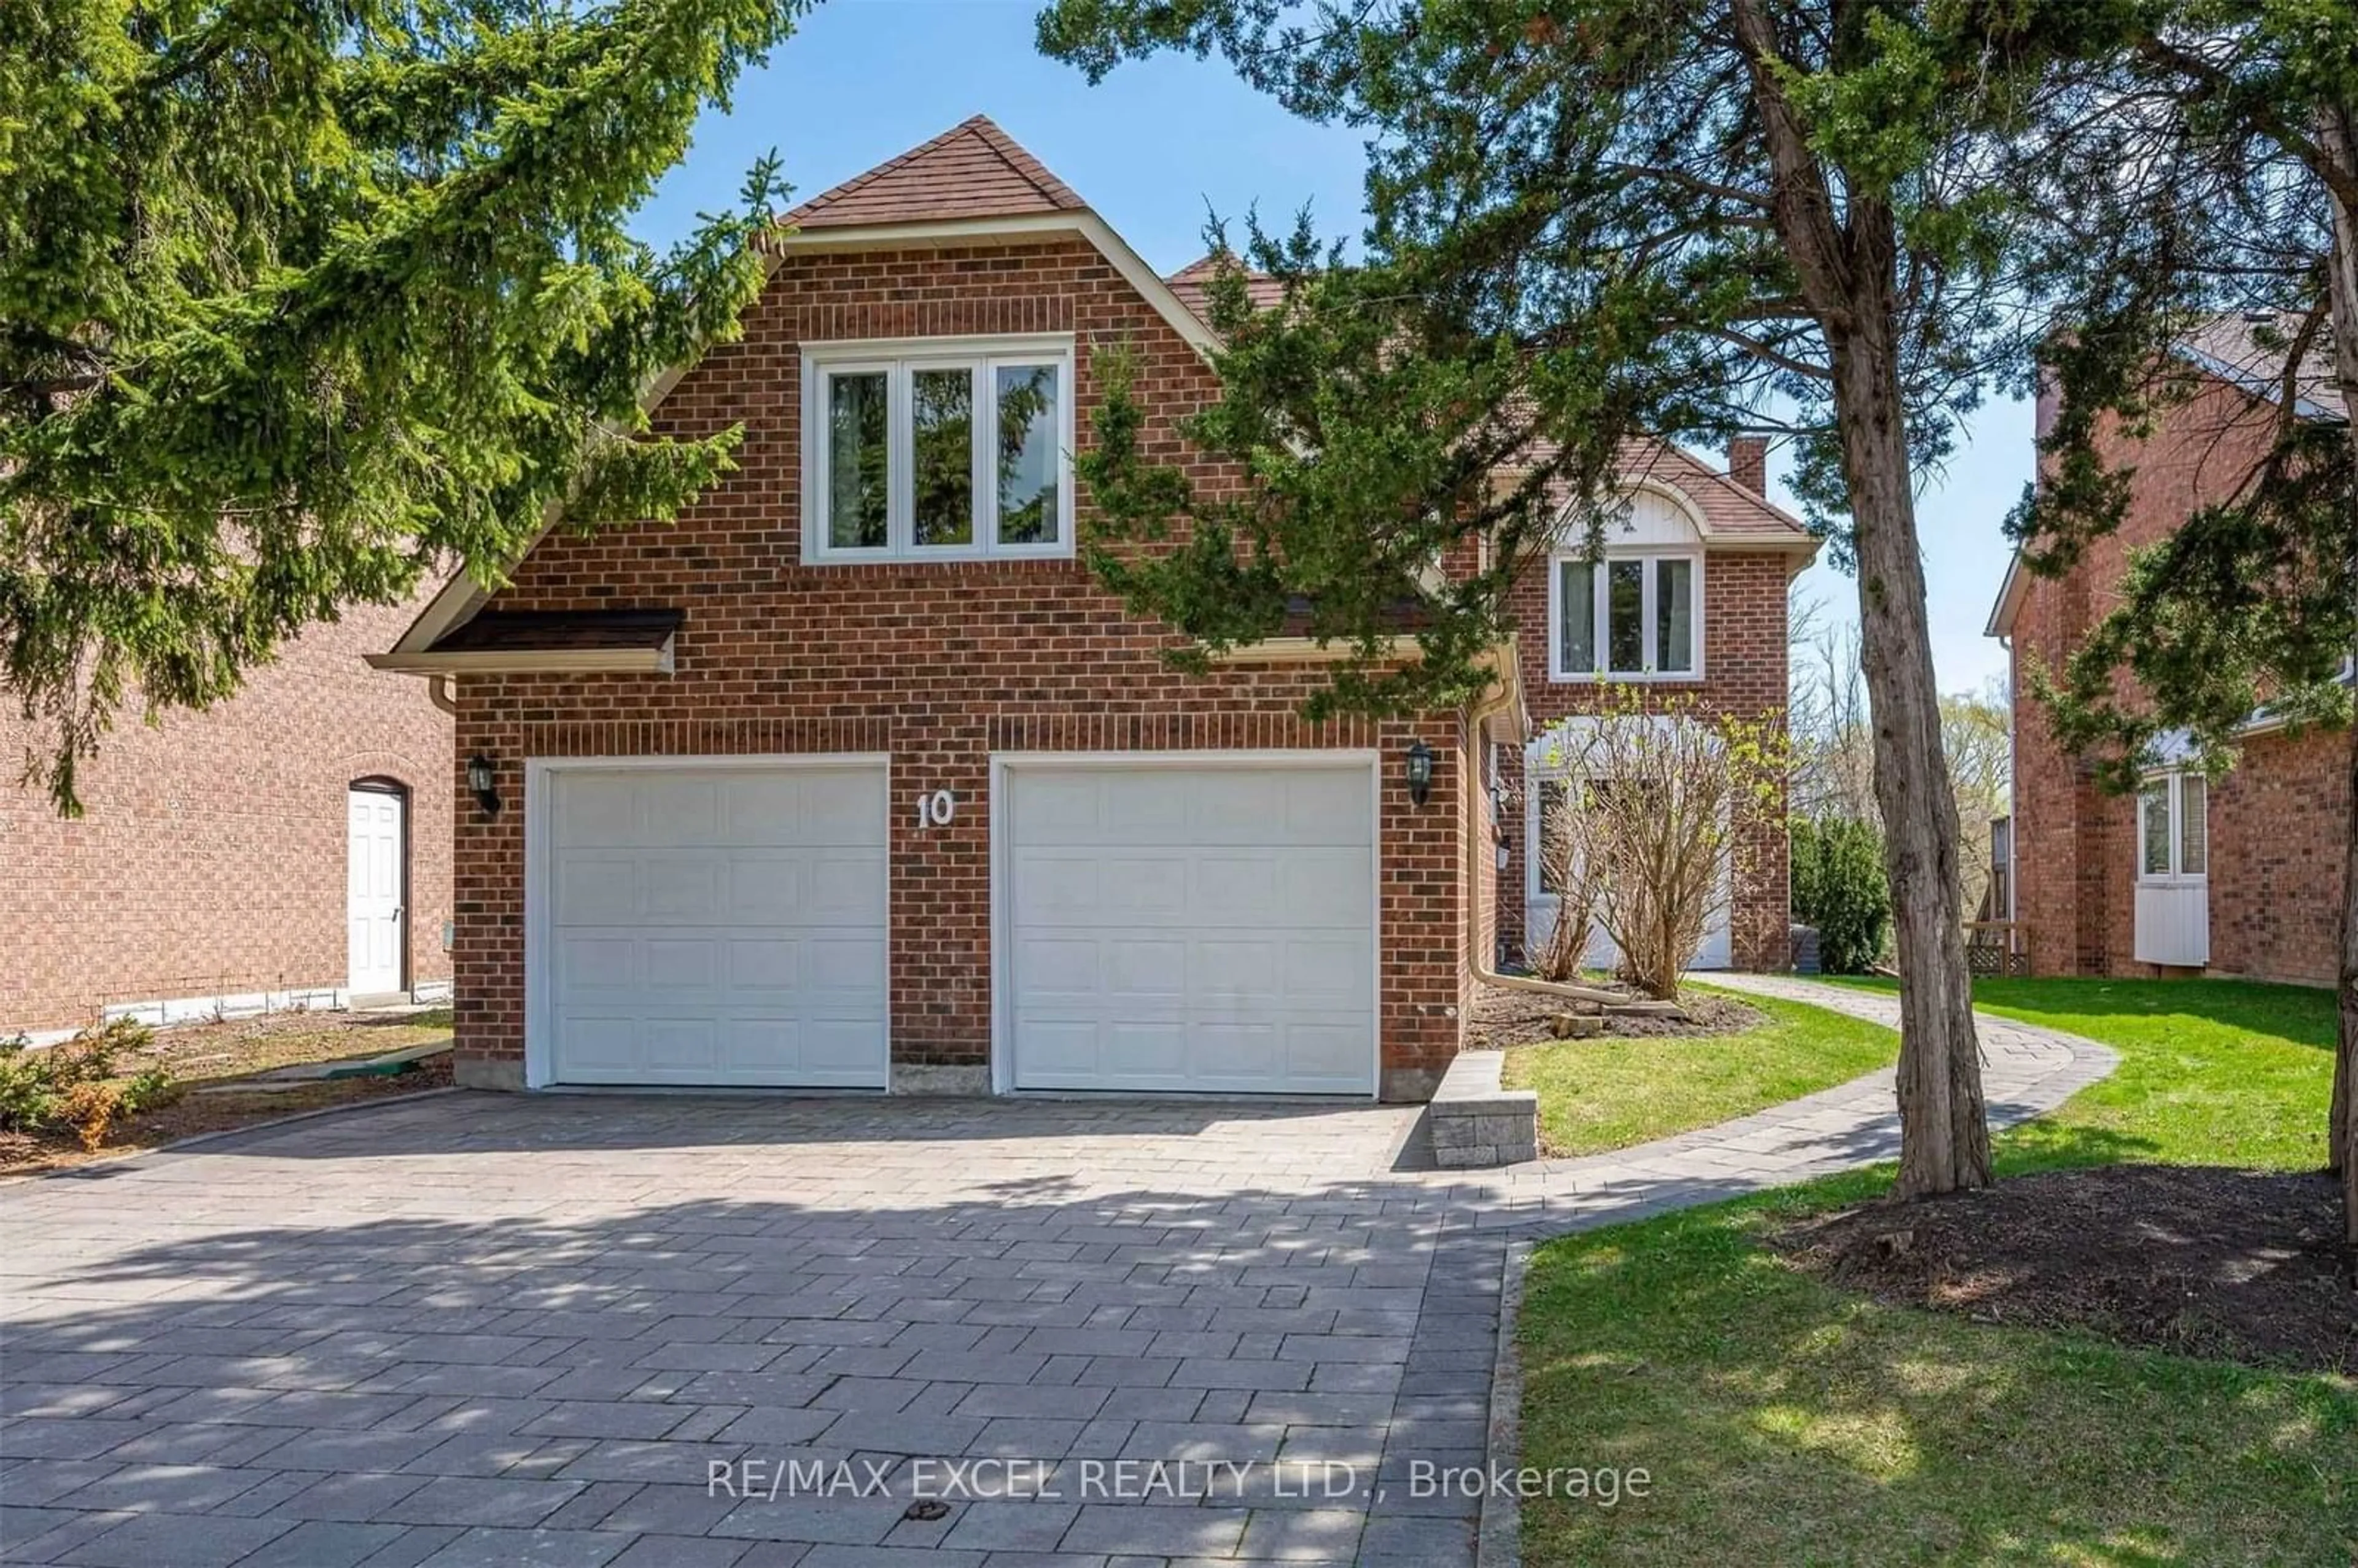 Home with brick exterior material for 10 Alexis Rd, Markham Ontario L3T 6Z1